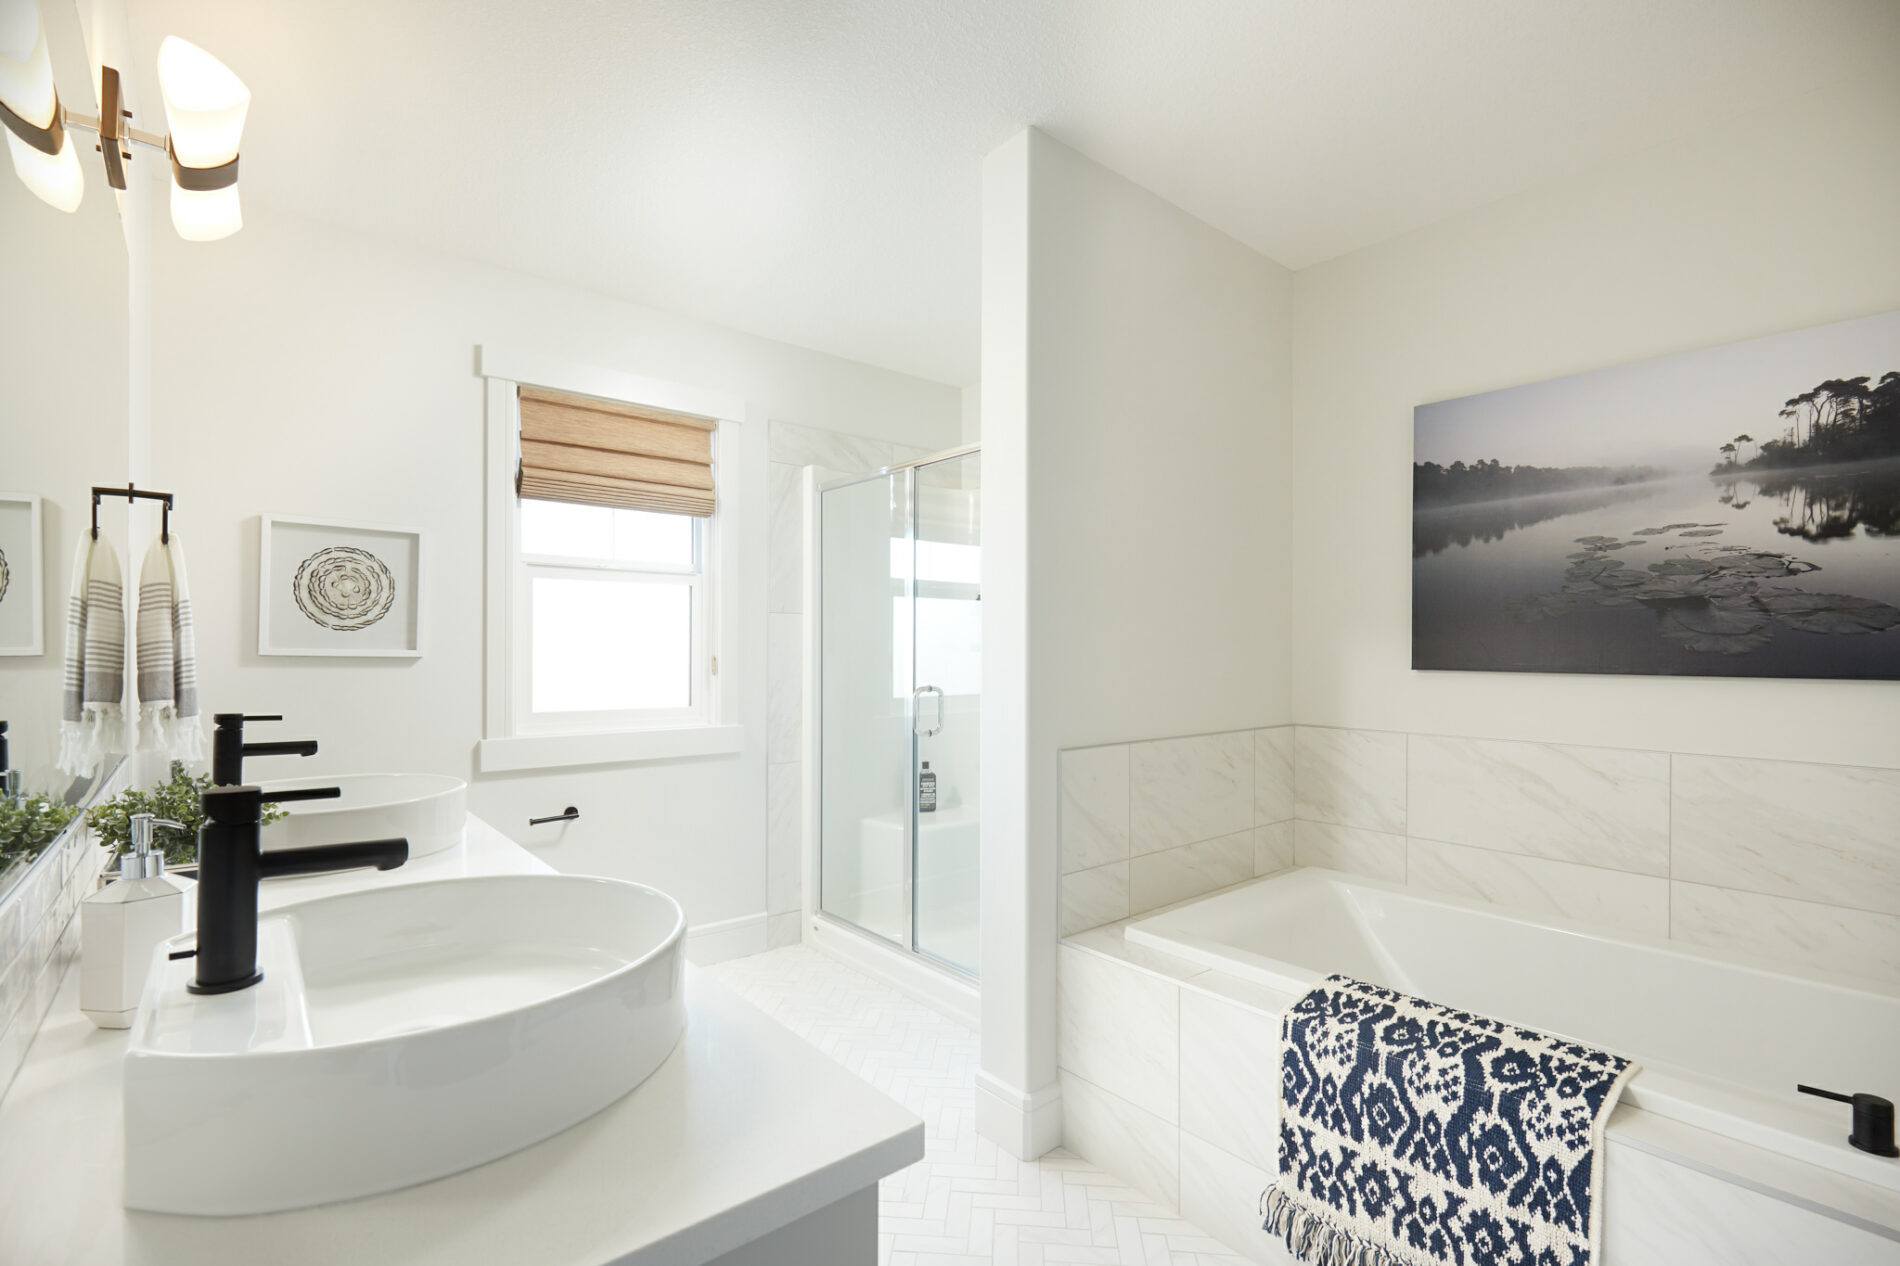 Light and bright ensuite of Archer Showhome with soaker tub, free-standing shower and dual vanity with vessel sinks and black faucets